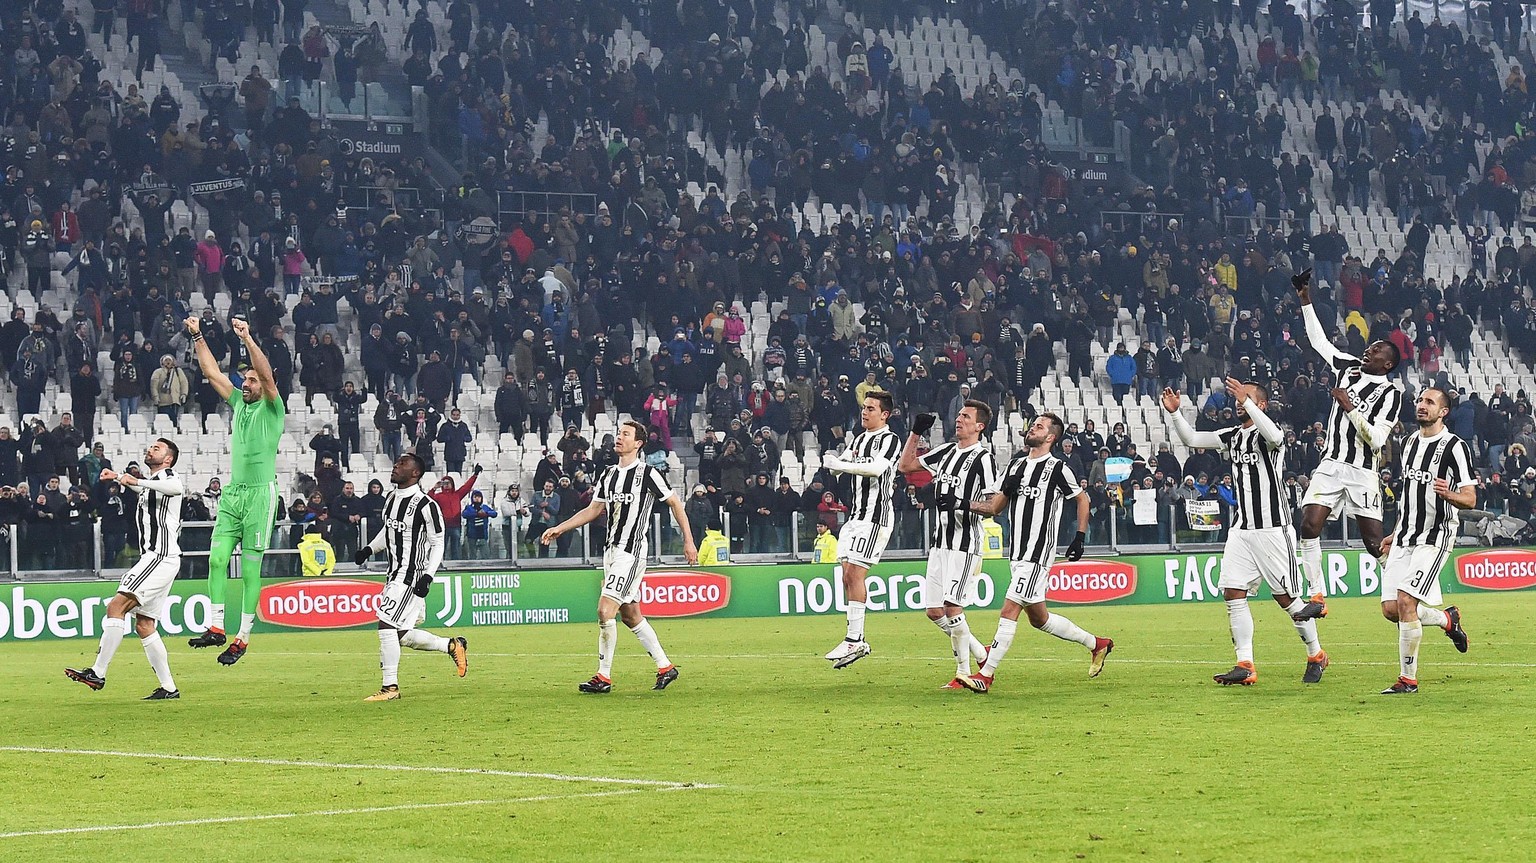 Juventus players celebrate their 1-0 win at the end of the Italian Cup semifinal second-leg soccer match between Juventus and Atalanta, at the Allianz Stadium in Turin, Italy, Wednesday, Feb. 28, 2018 ...